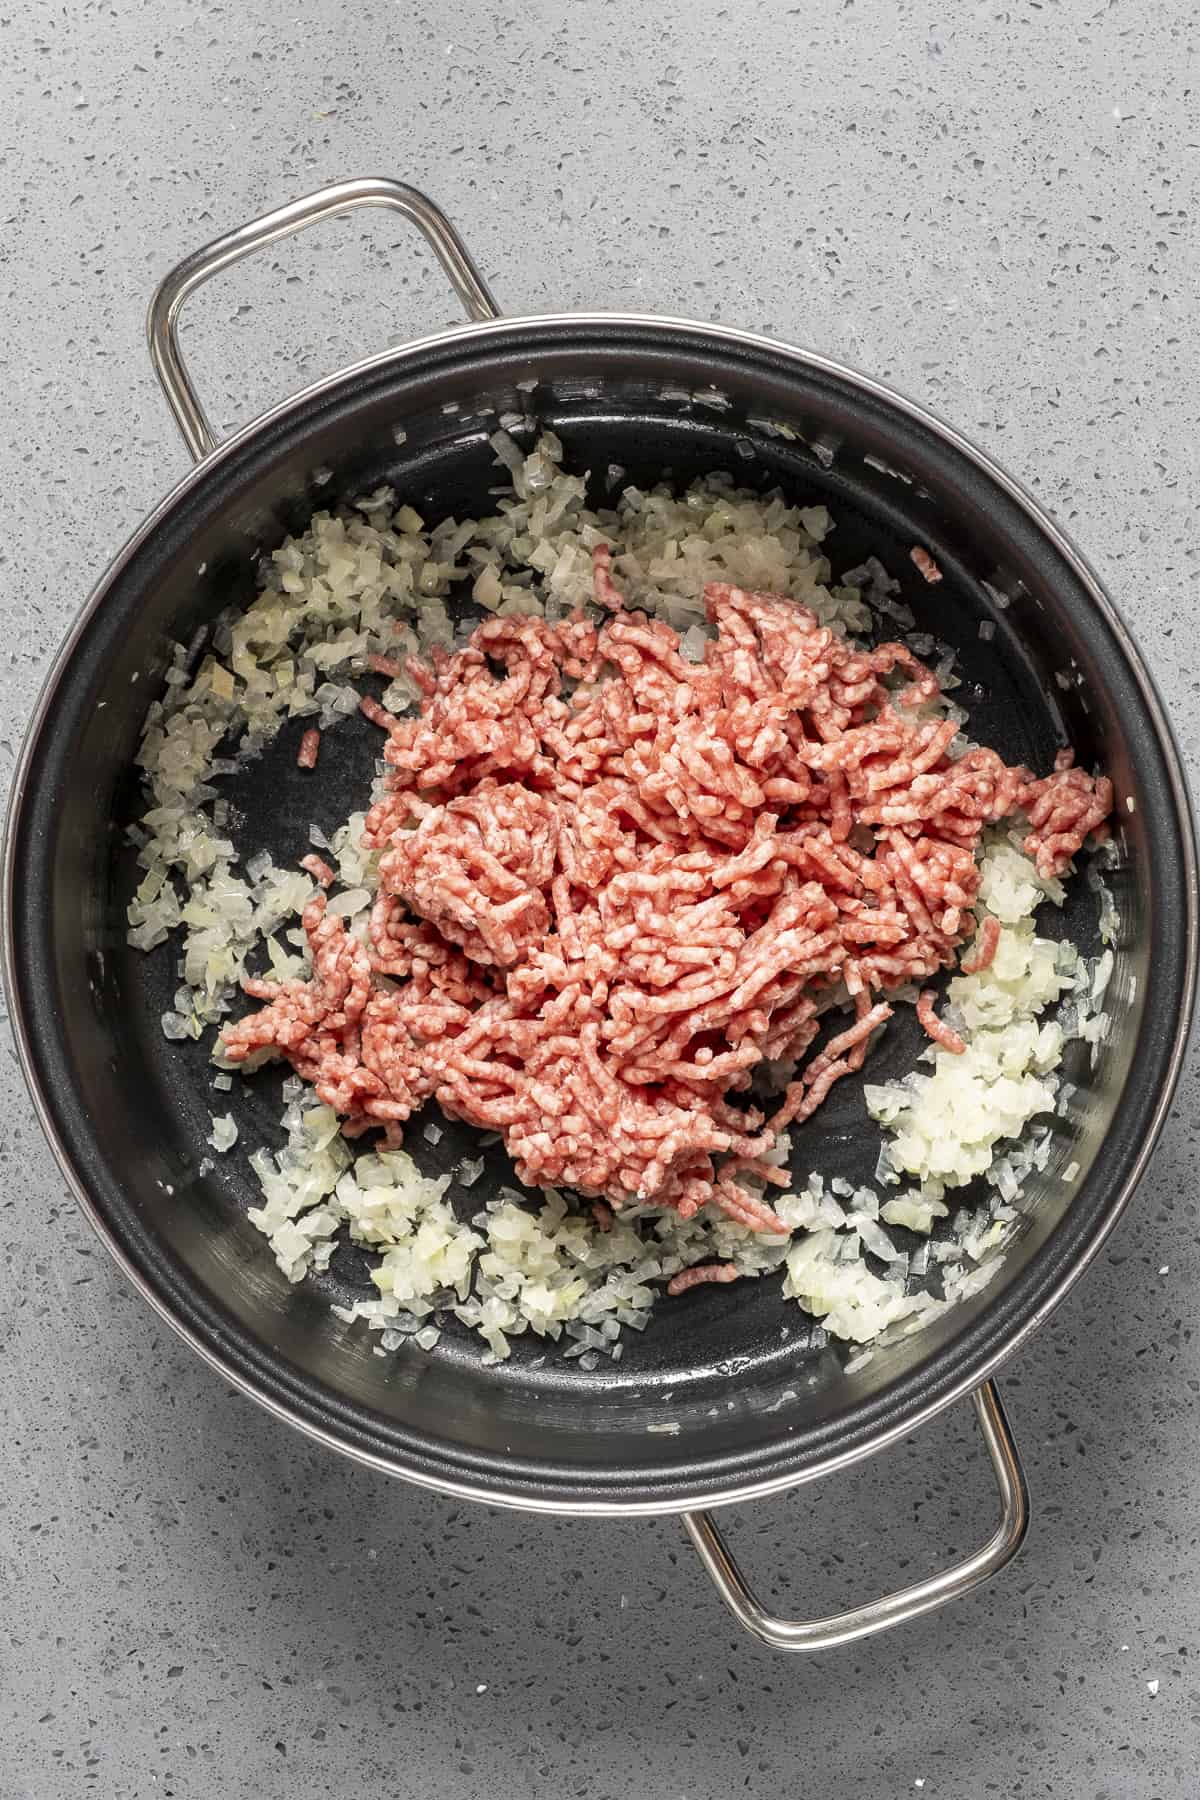 Ground beef and onions cooking in a pt.